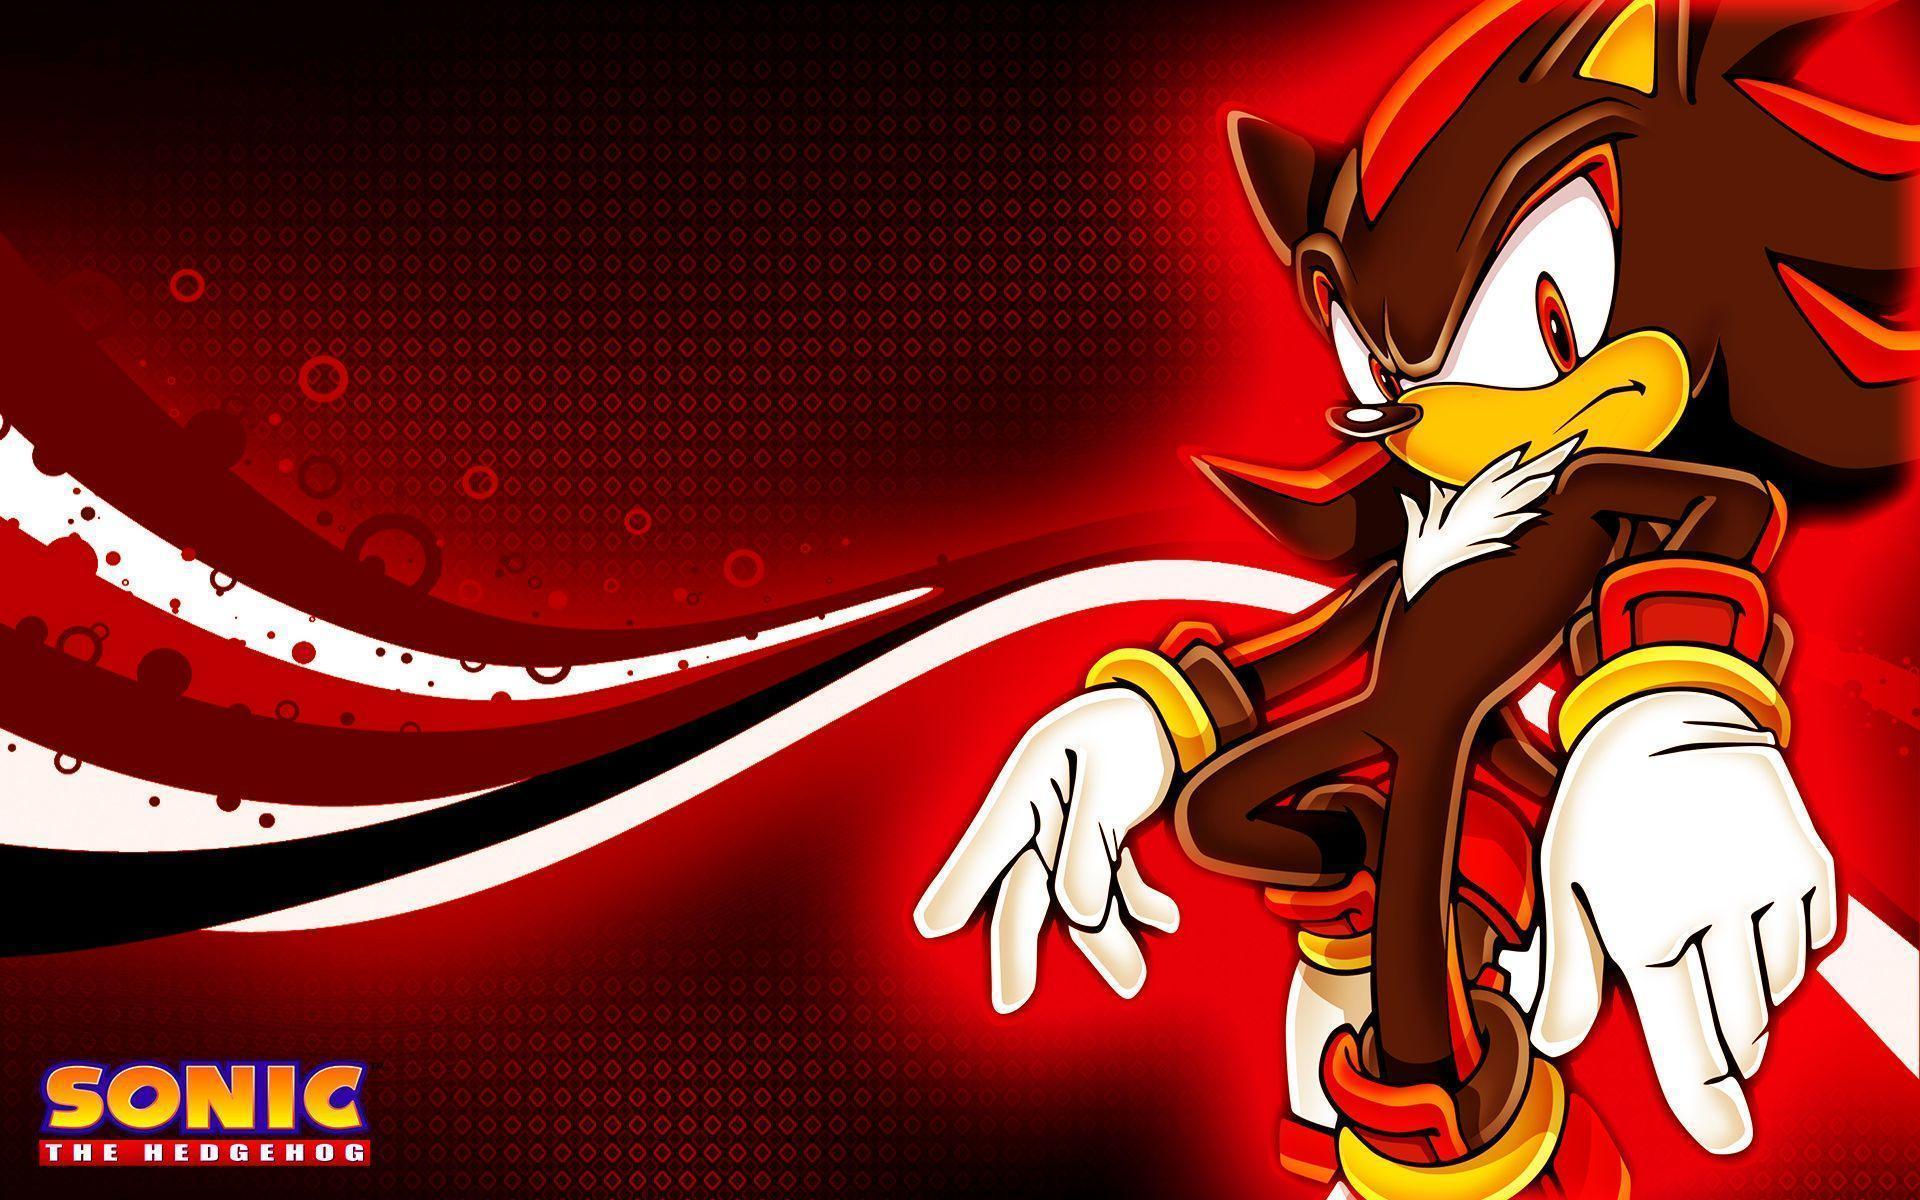 Download Free Shadow the Hedgehog Wallpapers